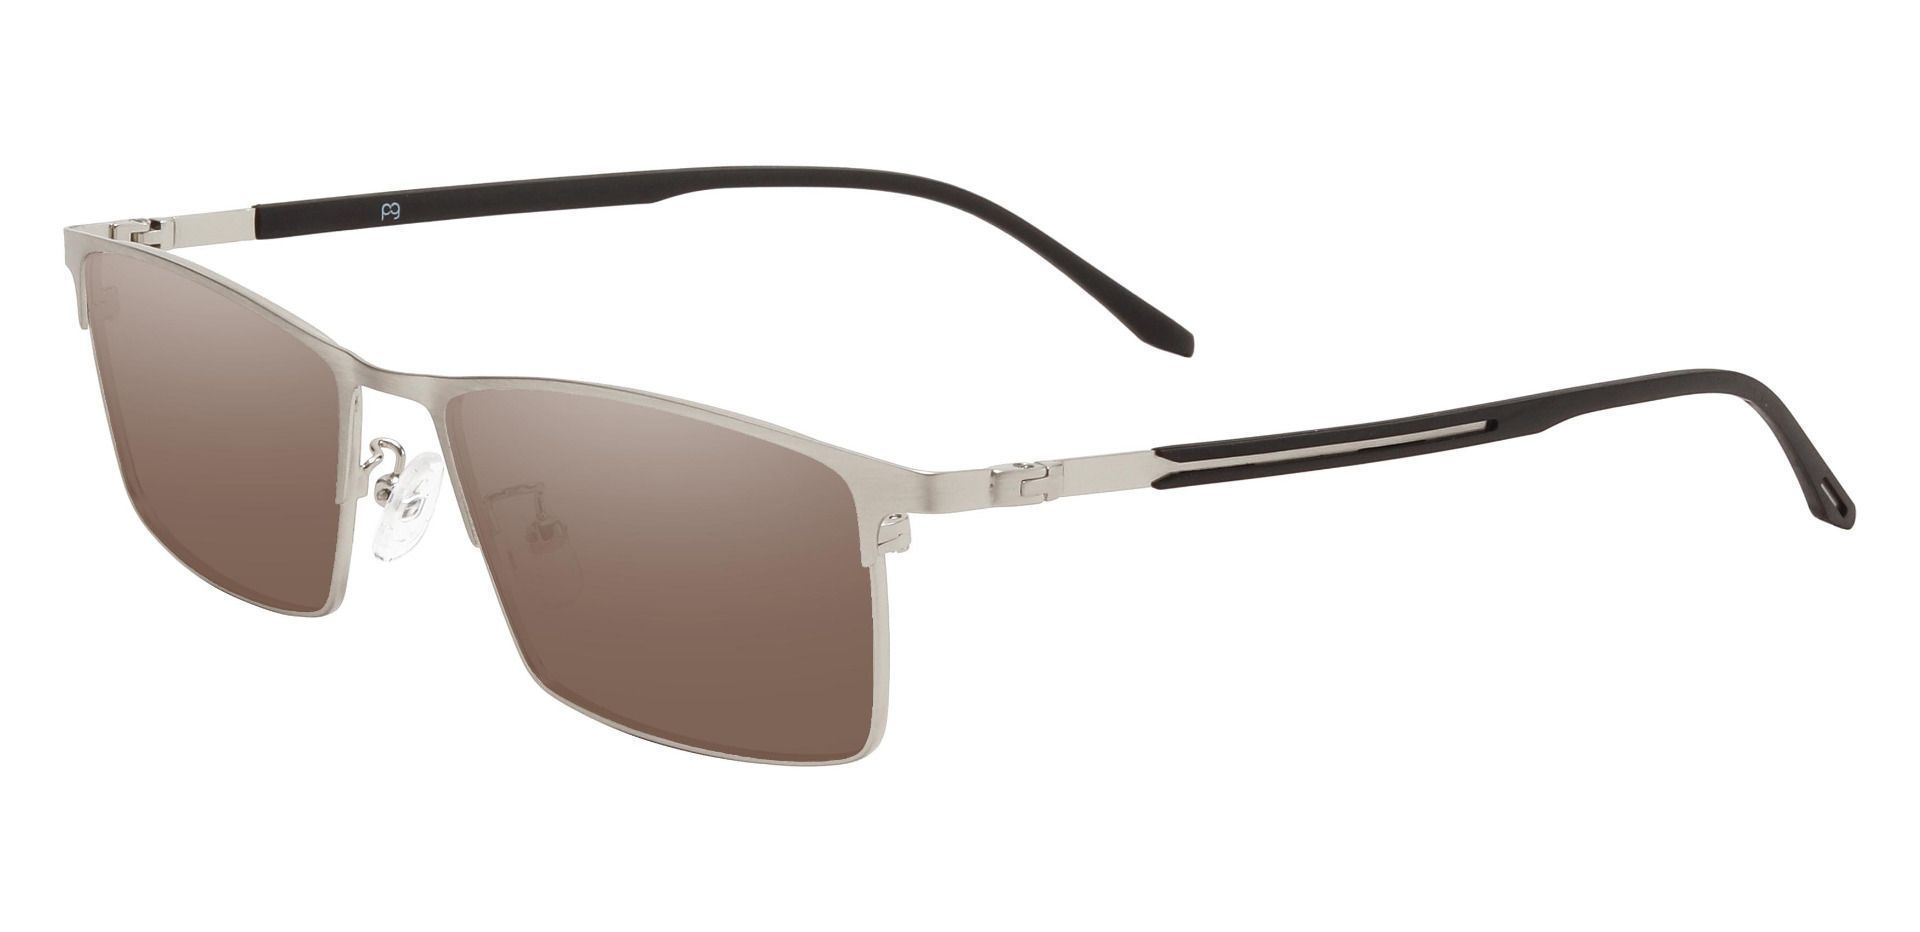 Regis Rectangle Reading Sunglasses - Silver Frame With Brown Lenses